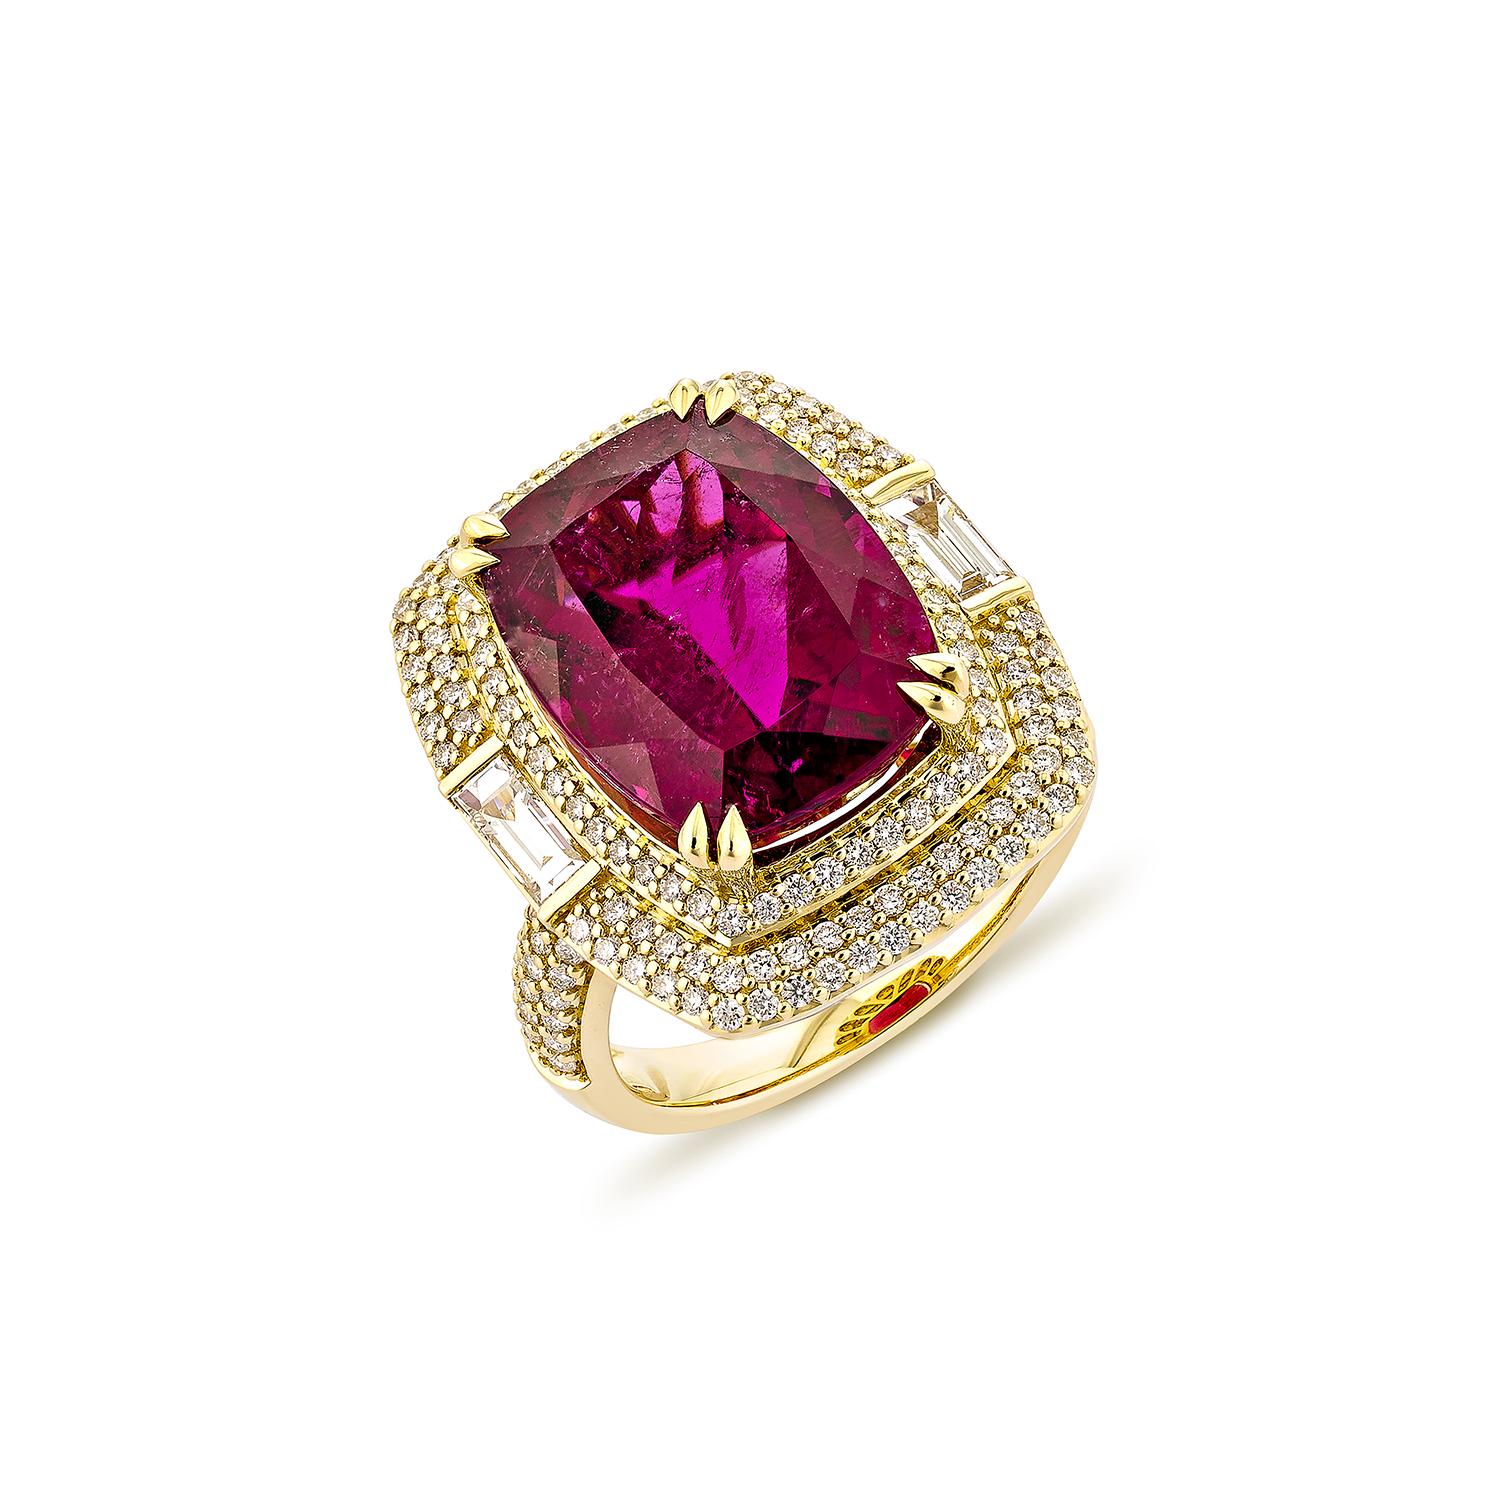 Contemporary 10.56 Carat Rubellite Fancy Ring in 18Karat Yellow Gold with White Diamond. For Sale